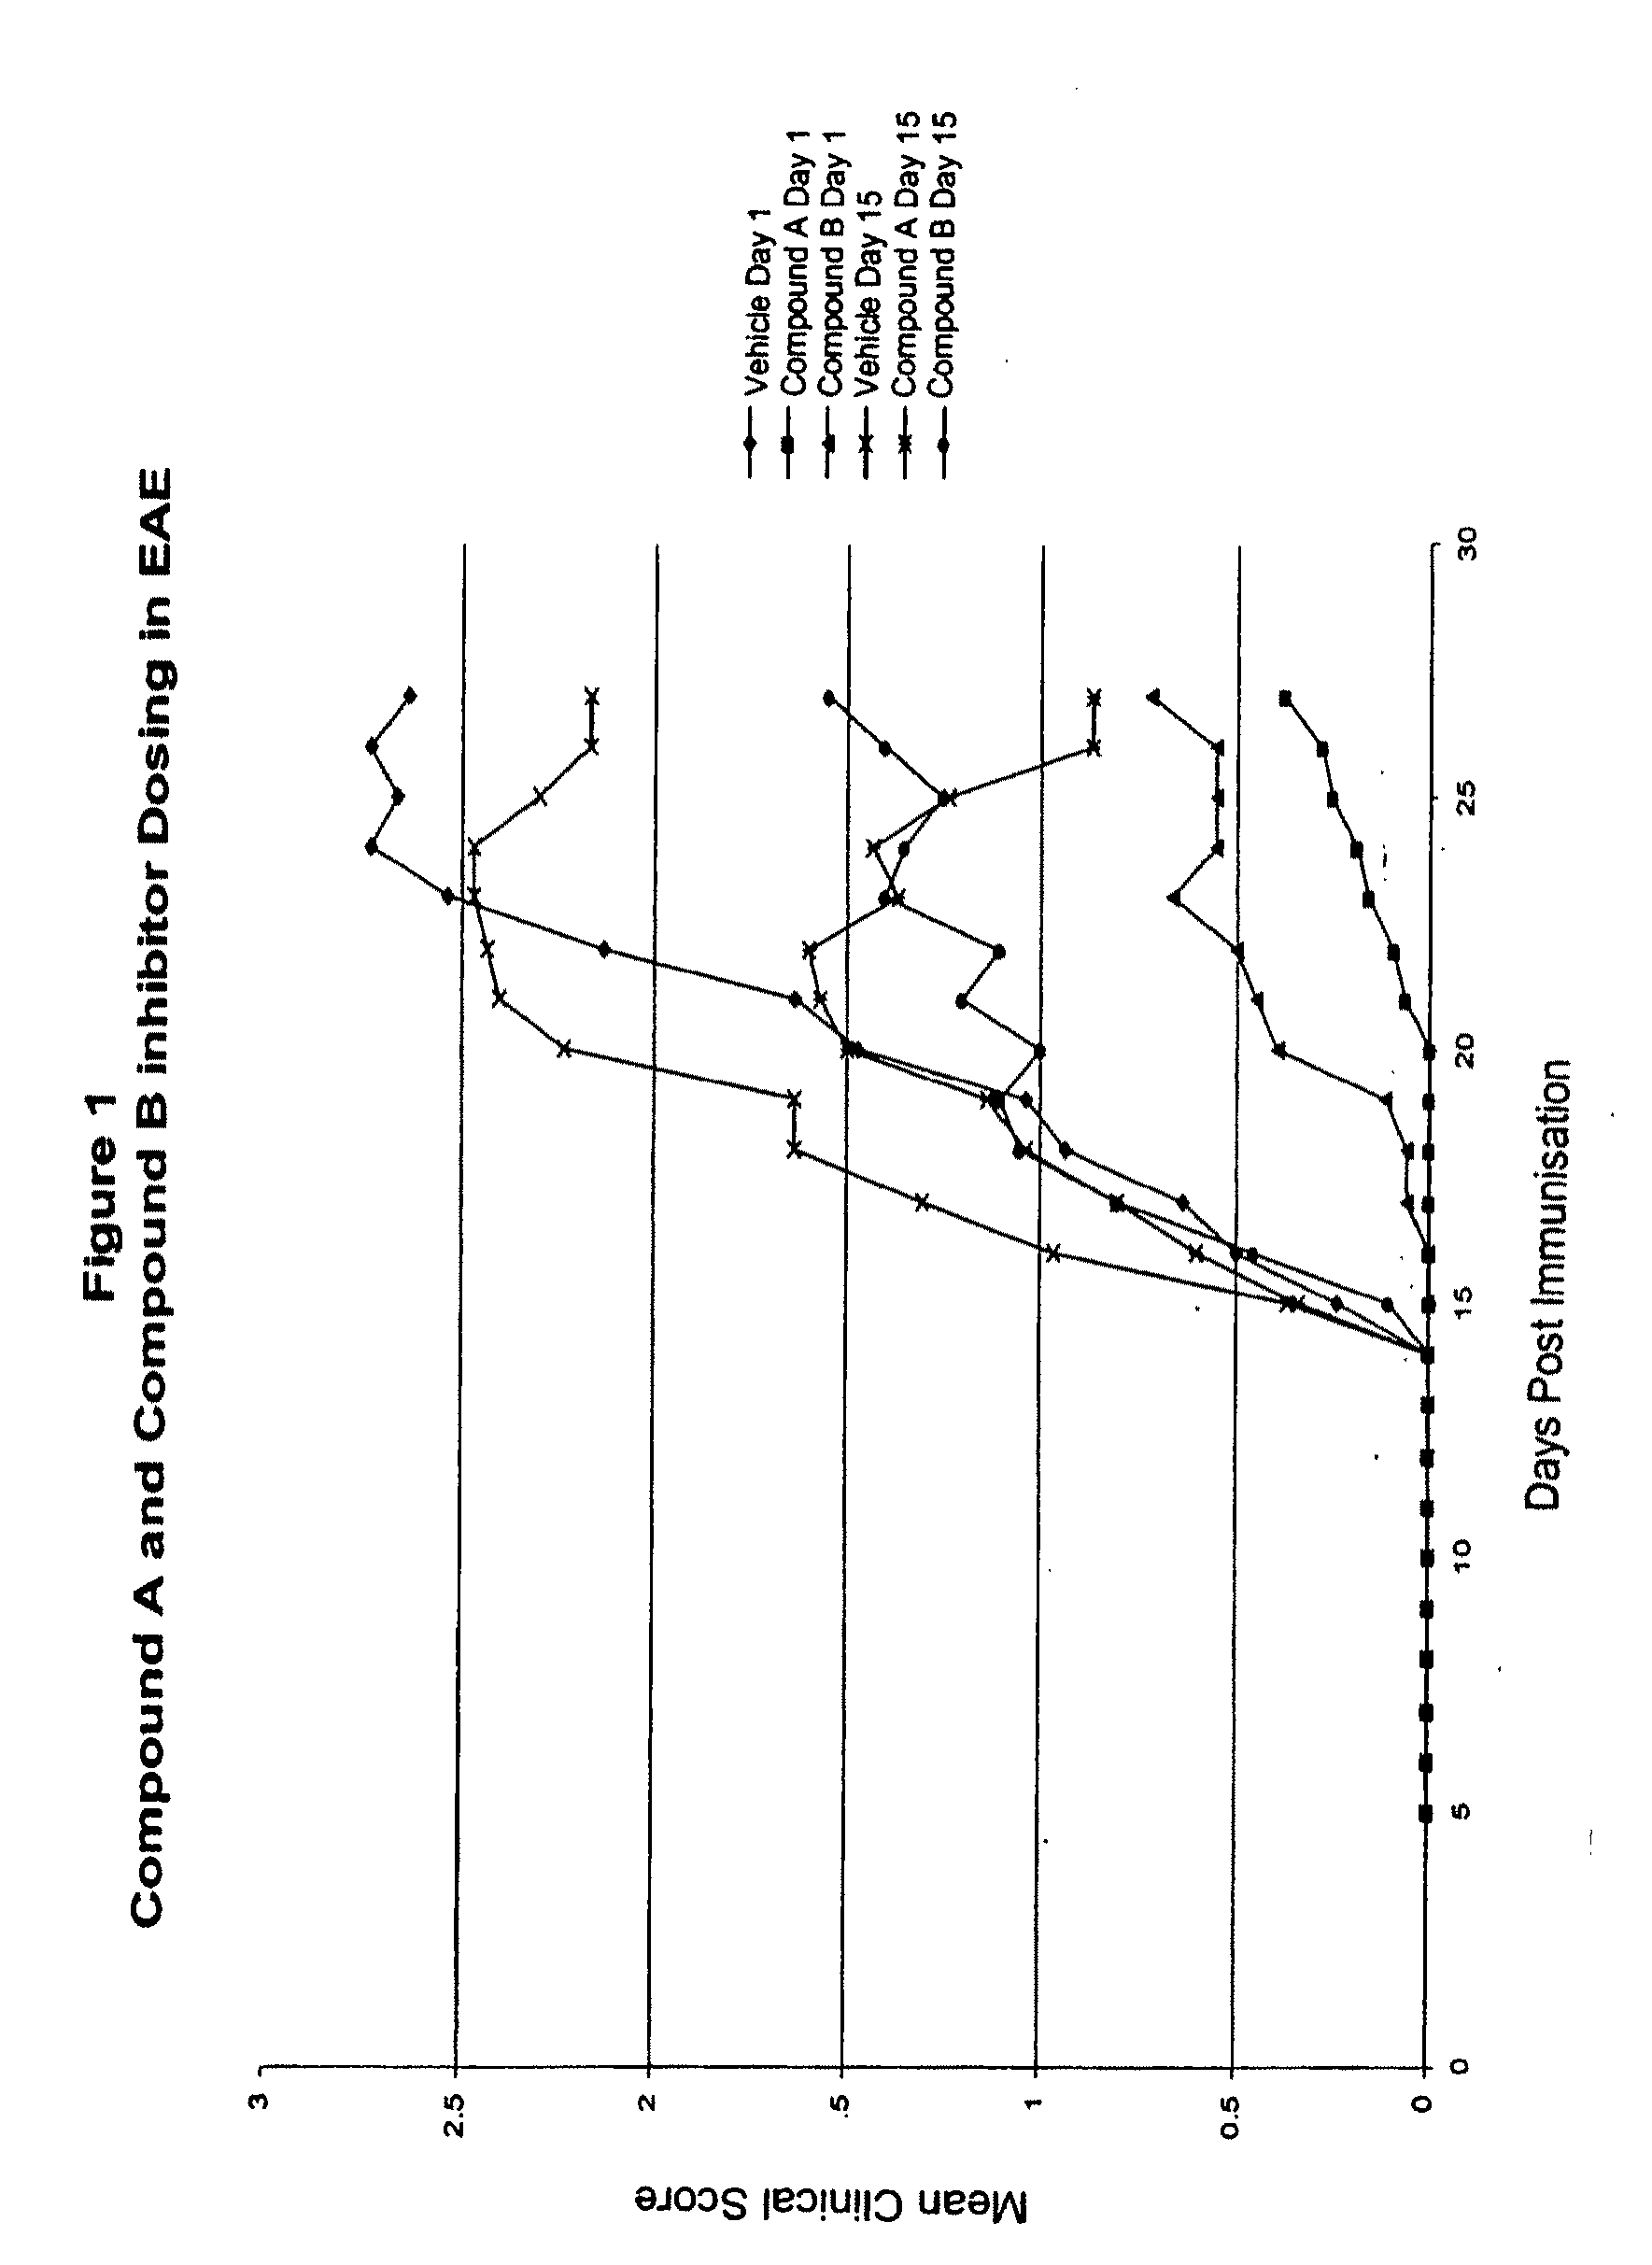 Methods for the Use of Inhibitors of Cytosolic Phospholipase A2